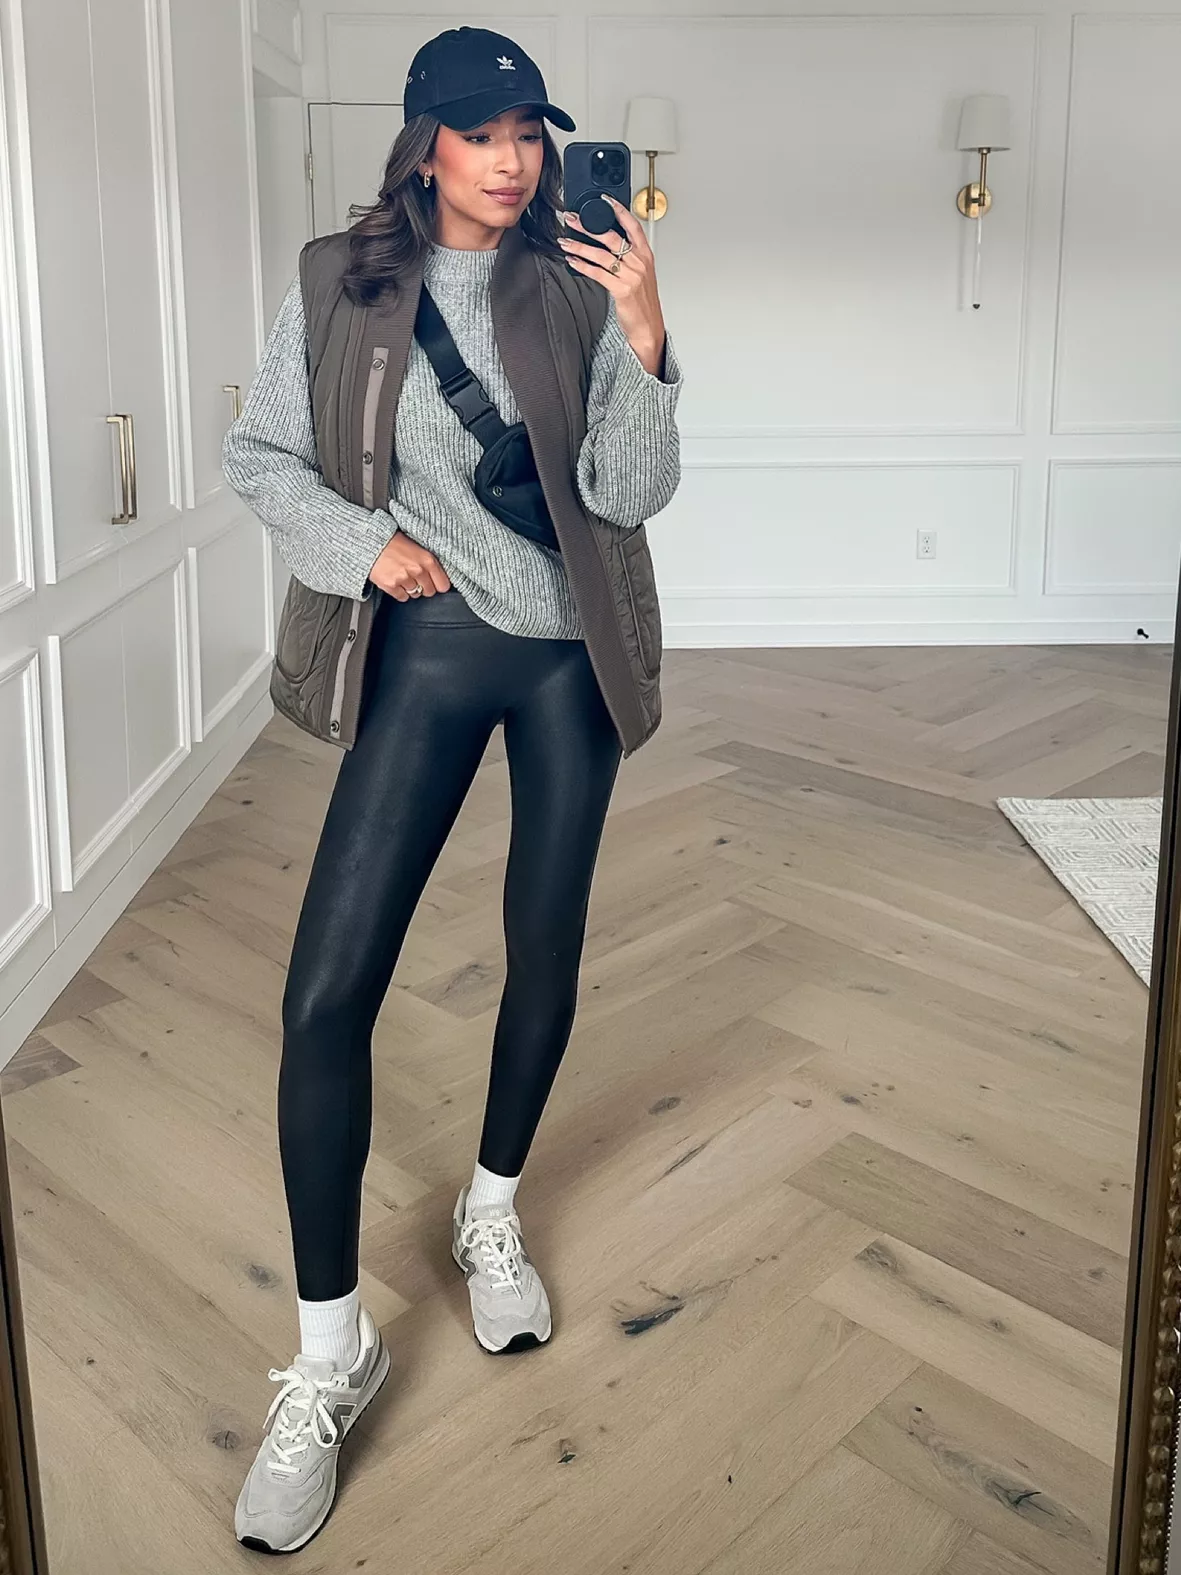 Grey Leggings with Black Dress Outfits (2 ideas & outfits)